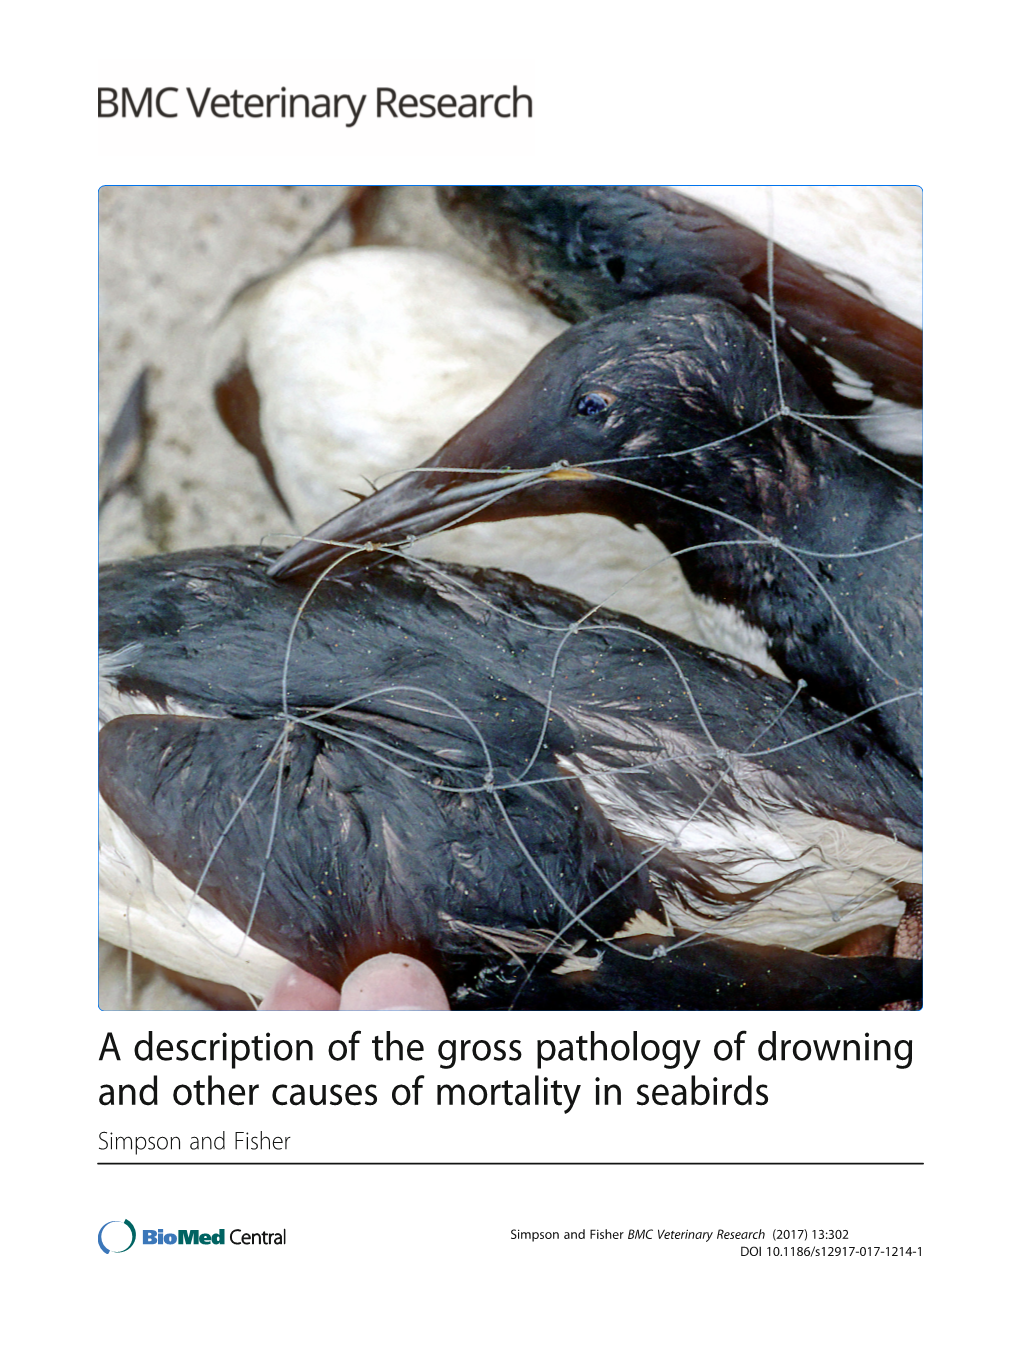 A Description of the Gross Pathology of Drowning and Other Causes of Mortality in Seabirds Simpson and Fisher